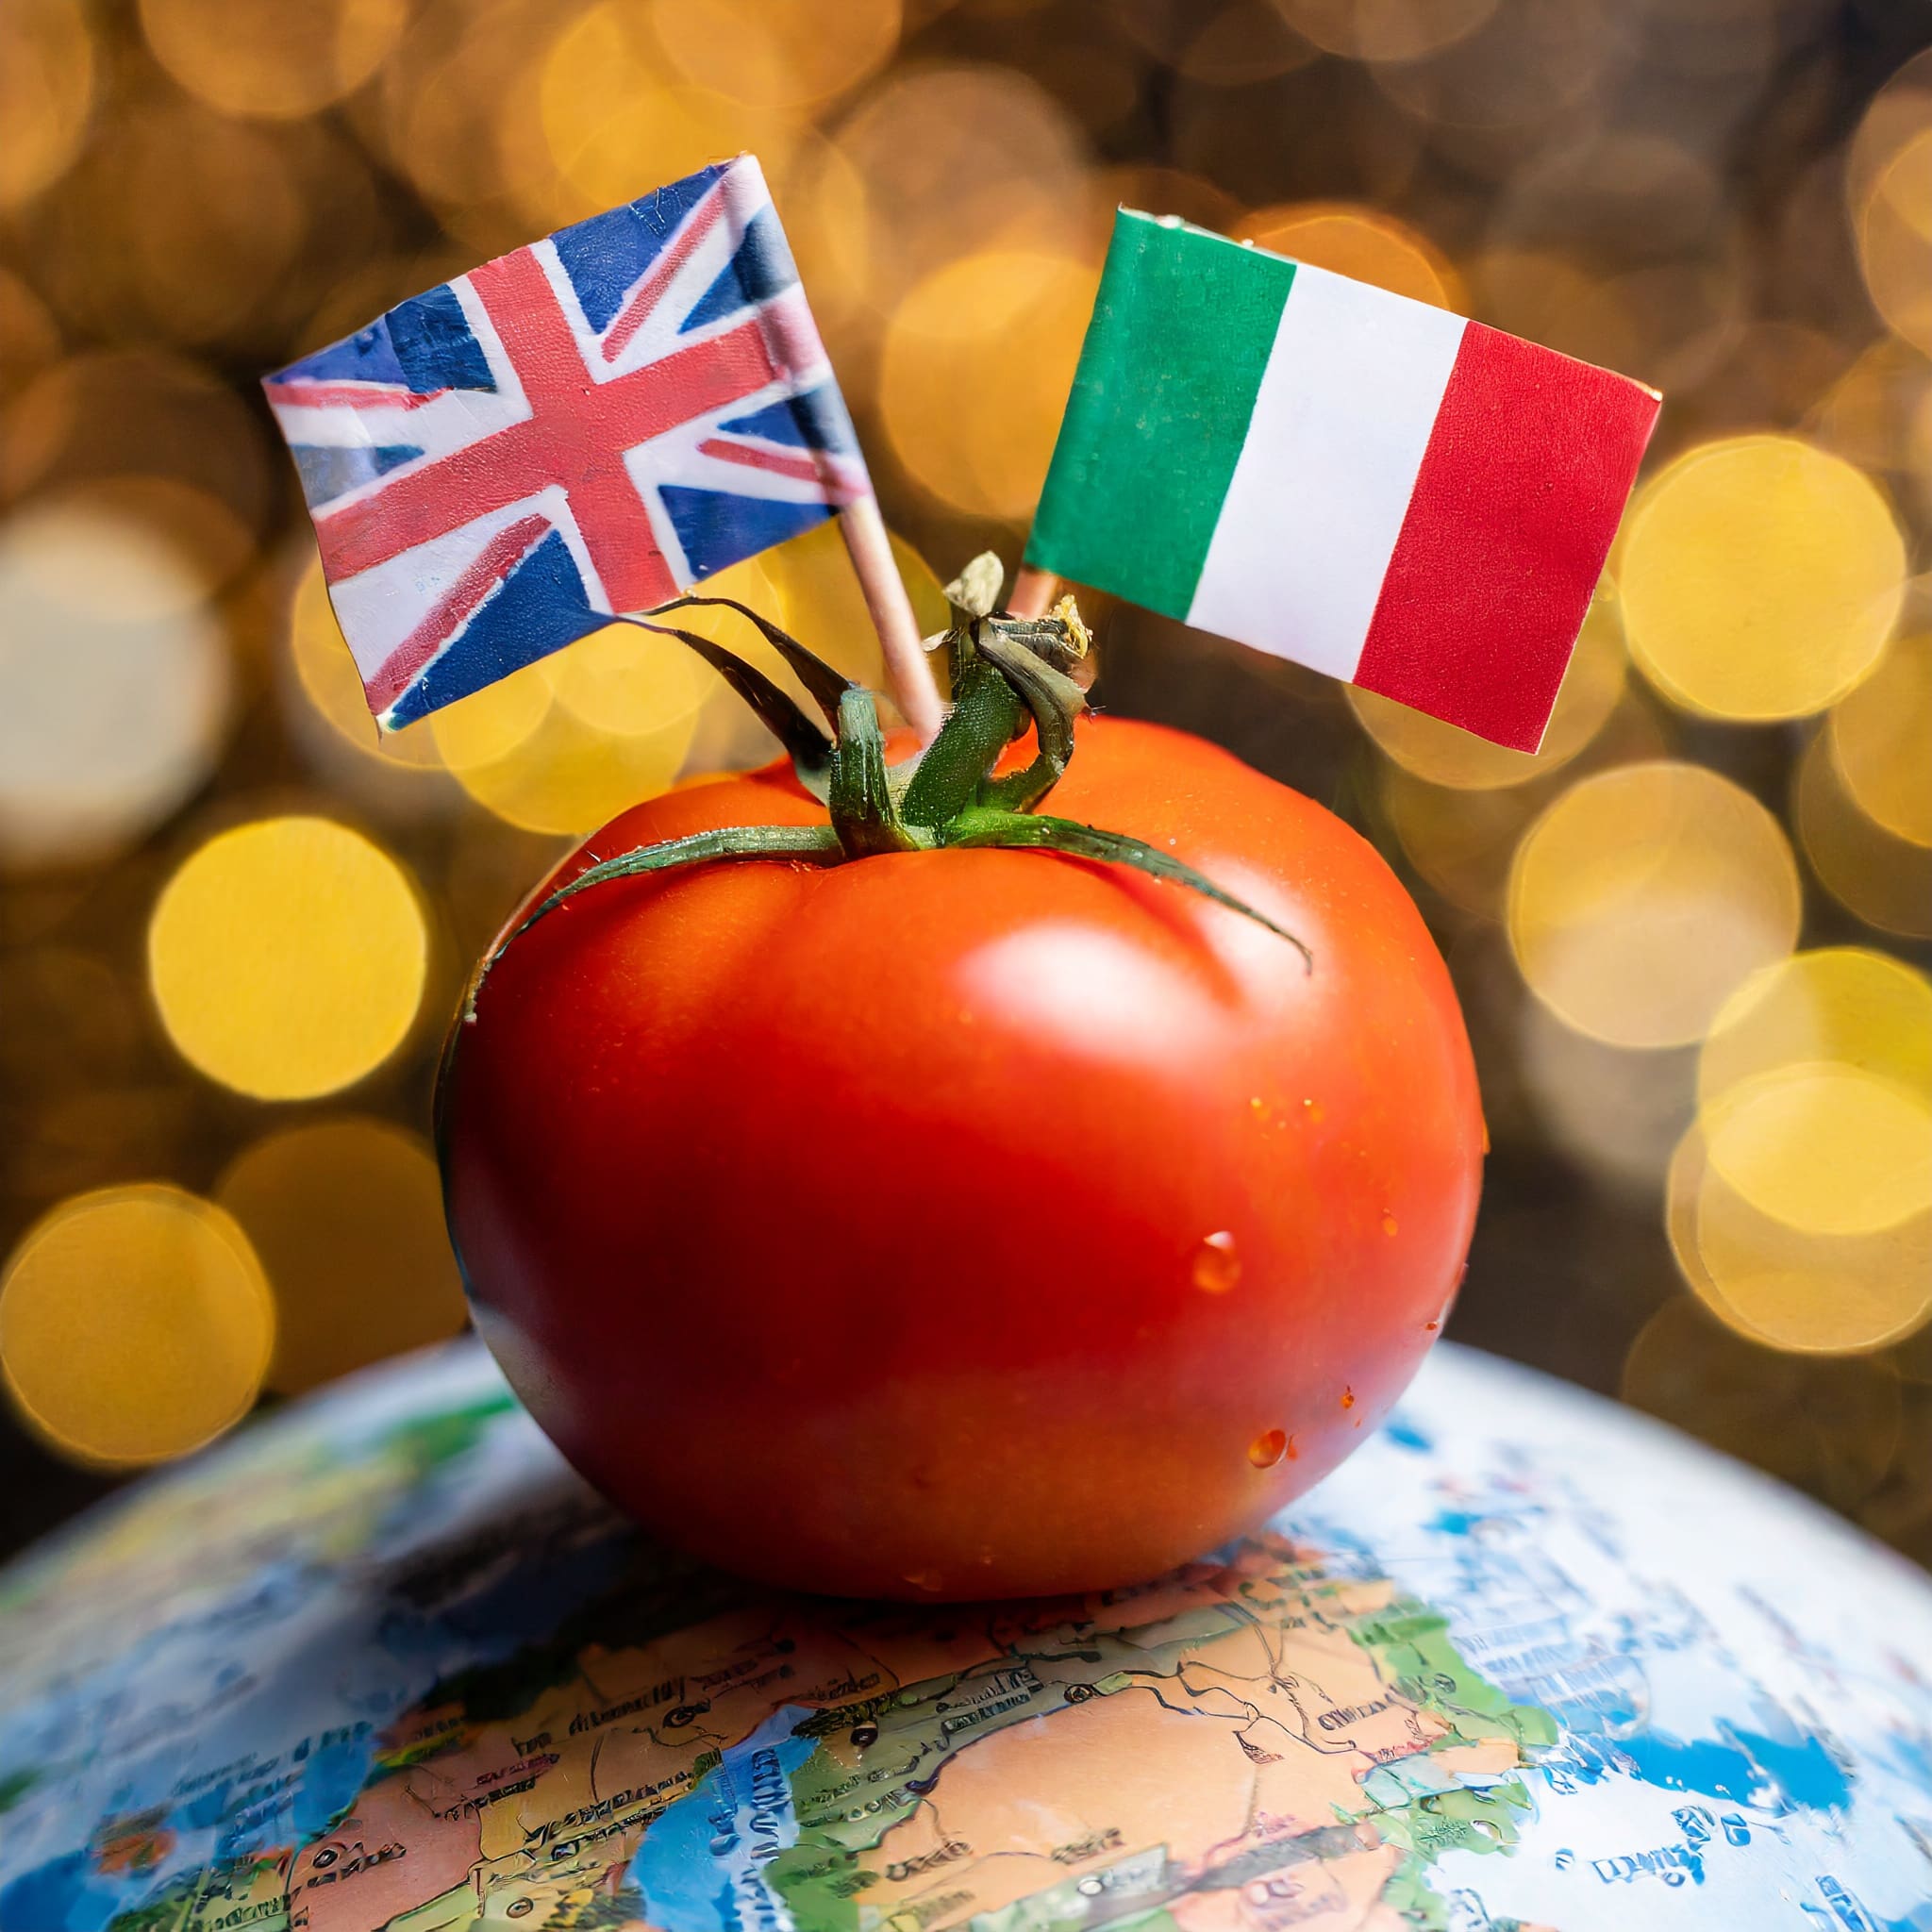 Red tomato sat on top of a globe with the British and Italian flags